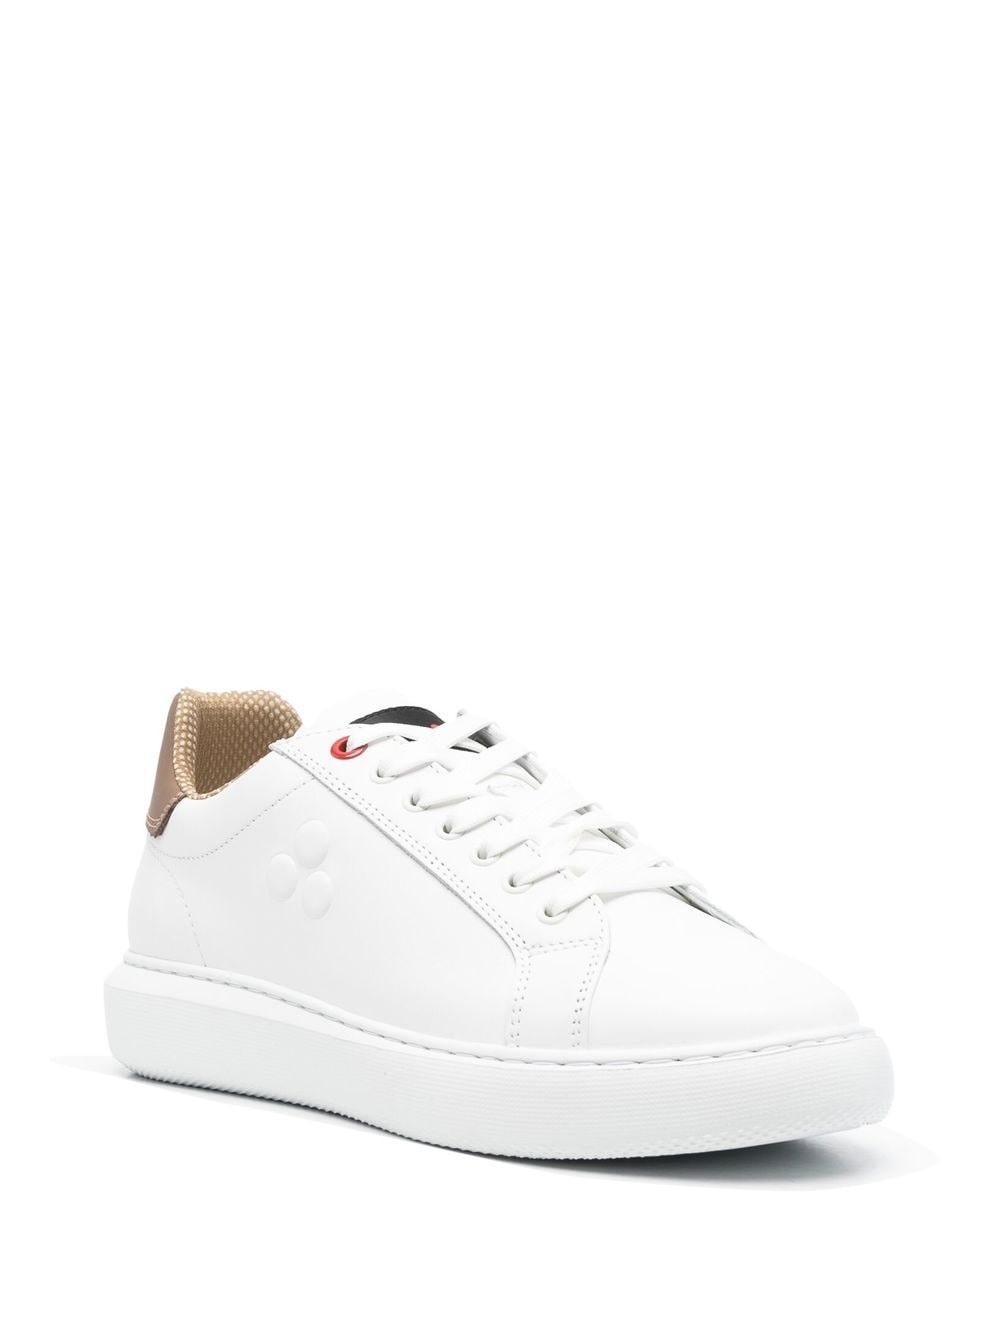 Peuterey Packard lace-up Sneakers - Farfetch